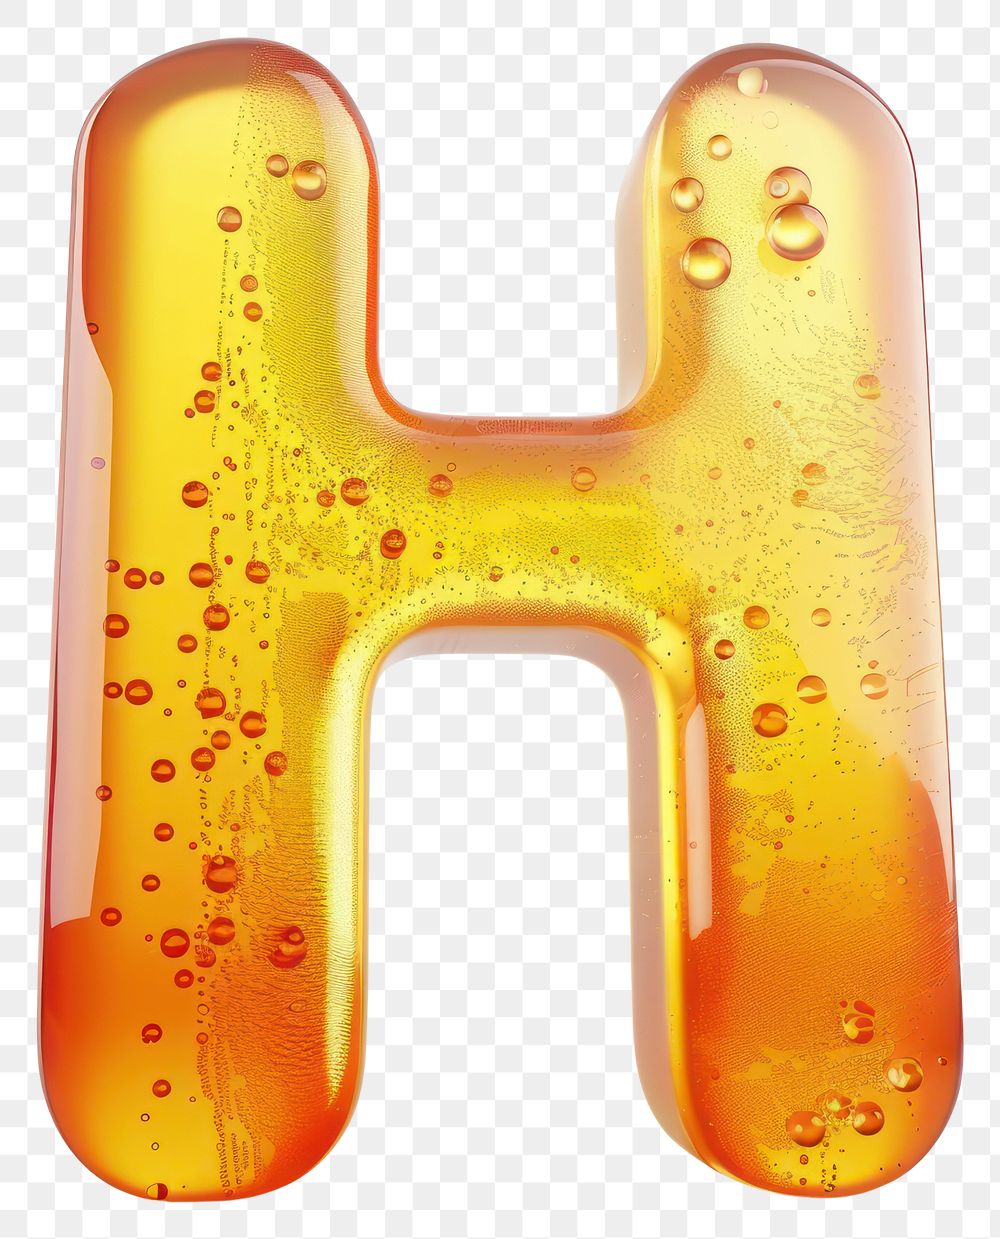 Letter H yellow symbol white background.